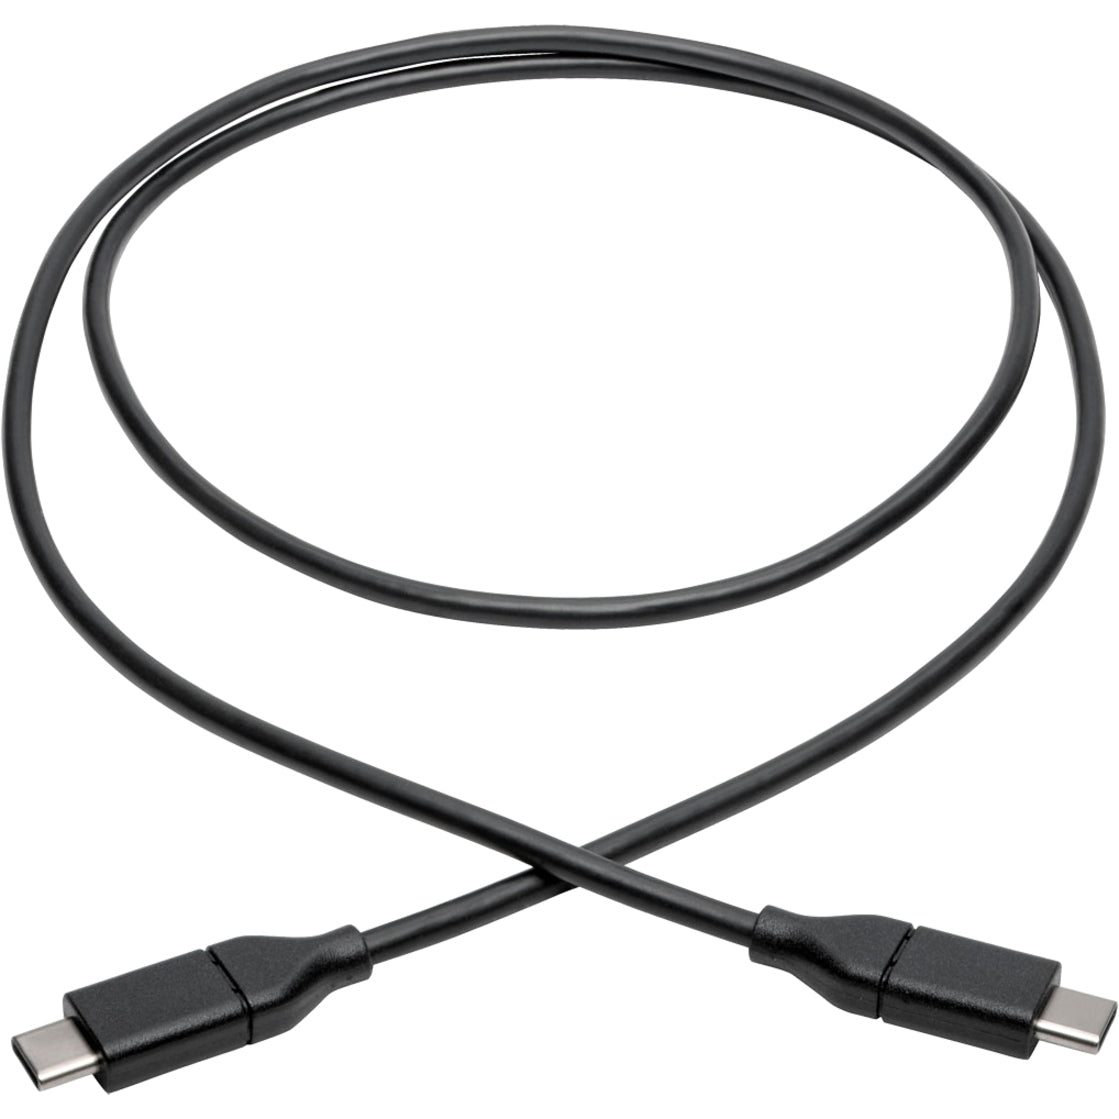 Tripp Lite U040-003-C-5A USB 2.0 Hi-Speed Cable with 5A Rating, USB-C to USB-C (M/M), 3 ft., Molded, Corrosion Resistant, Strain Relief, EMI/RF Protection, Reversible